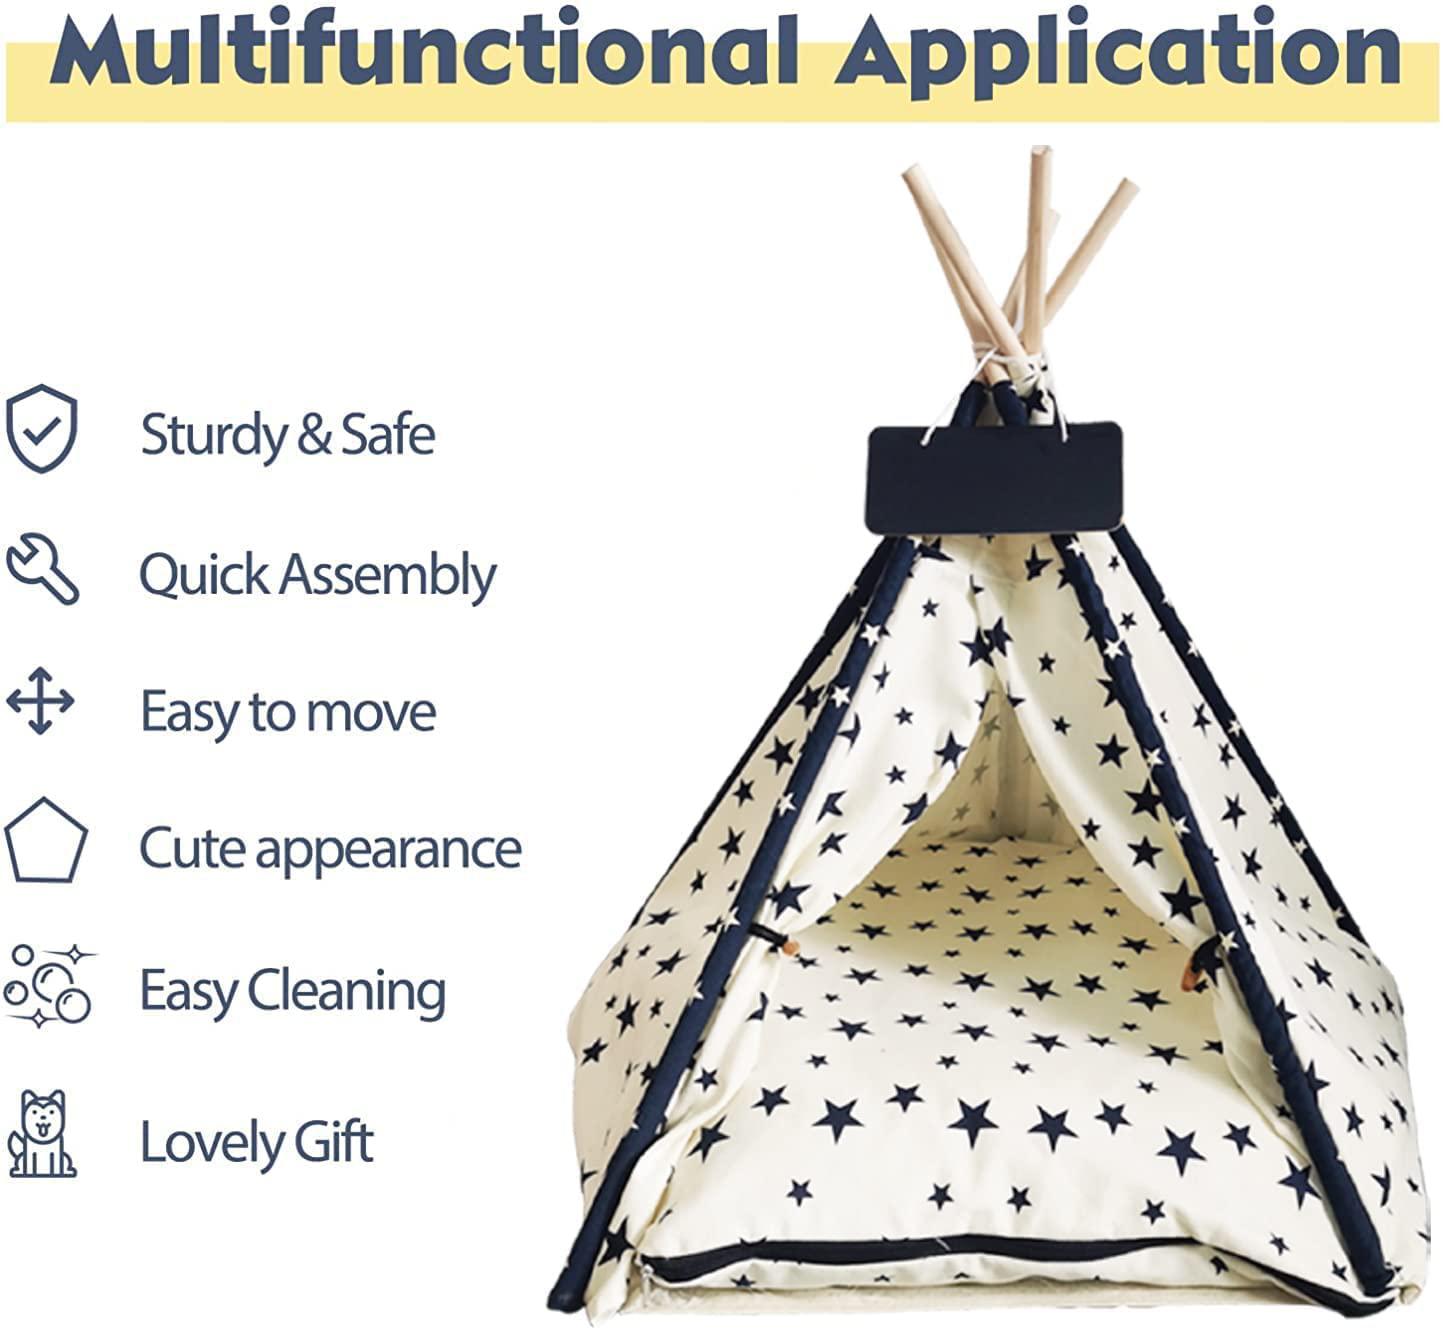 KUA YUE Folding Indoor Puppy Dogs House, Outdoor Portable Pet Teepee Dog & Cat Tents, 24Inch Small Dog & Cat Cute Puppy House with Soft Cushion Bed Animals & Pet Supplies > Pet Supplies > Dog Supplies > Dog Houses KUA YUE   